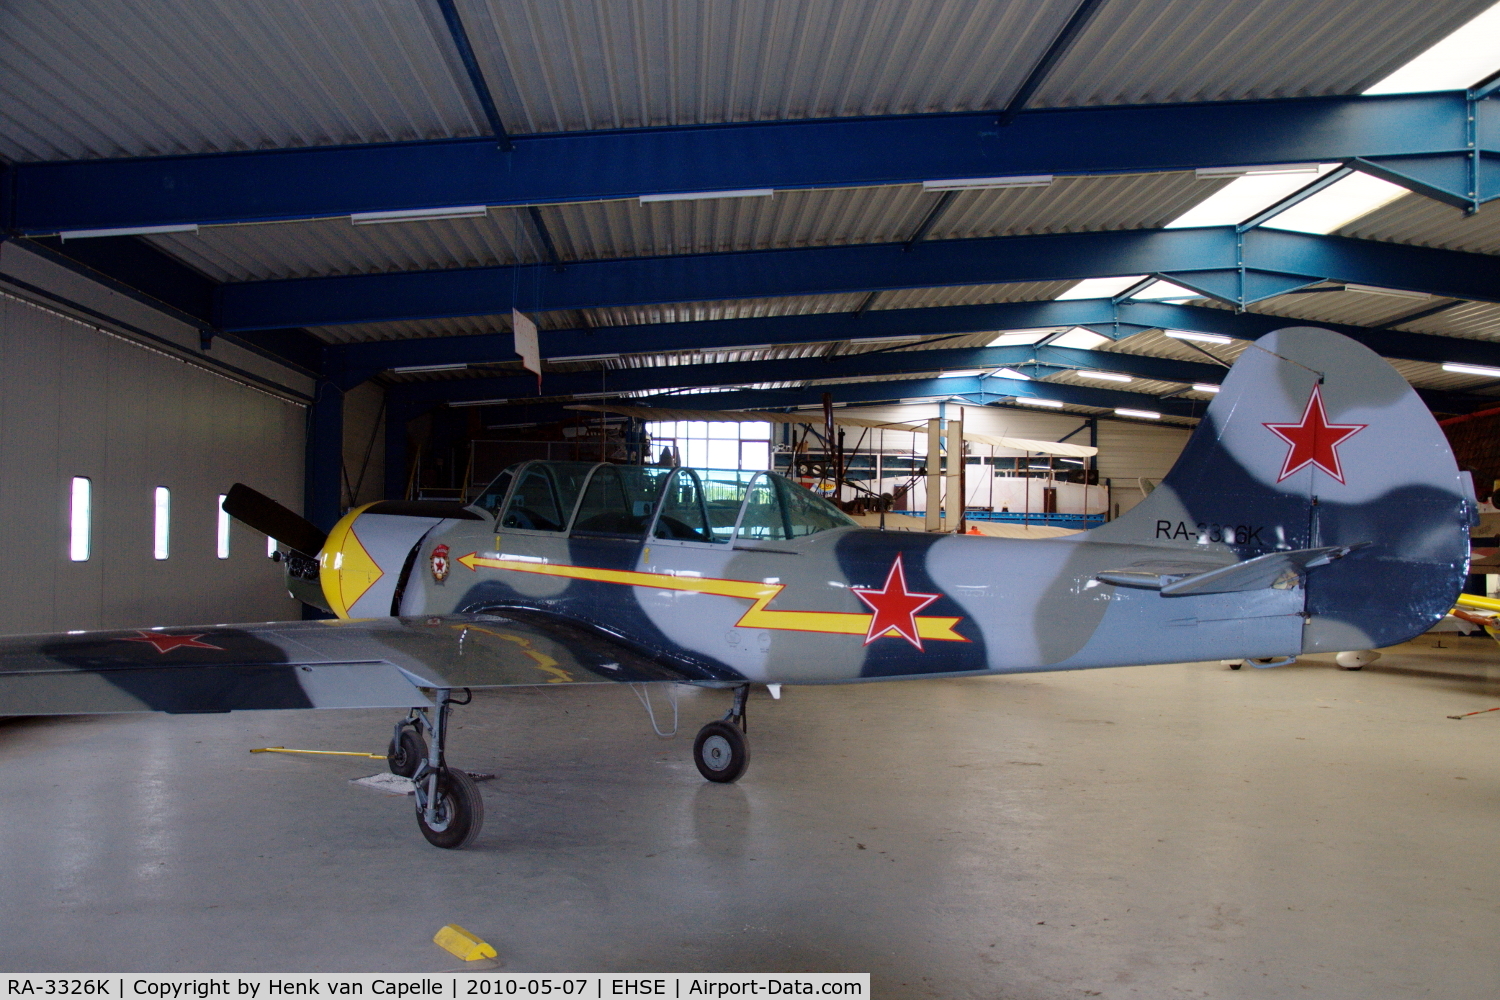 RA-3326K, 1987 Bacau Yak-52 C/N 877401, Yak-52 parked in the Flying Museum at Seppe airfield, the Netherlands.